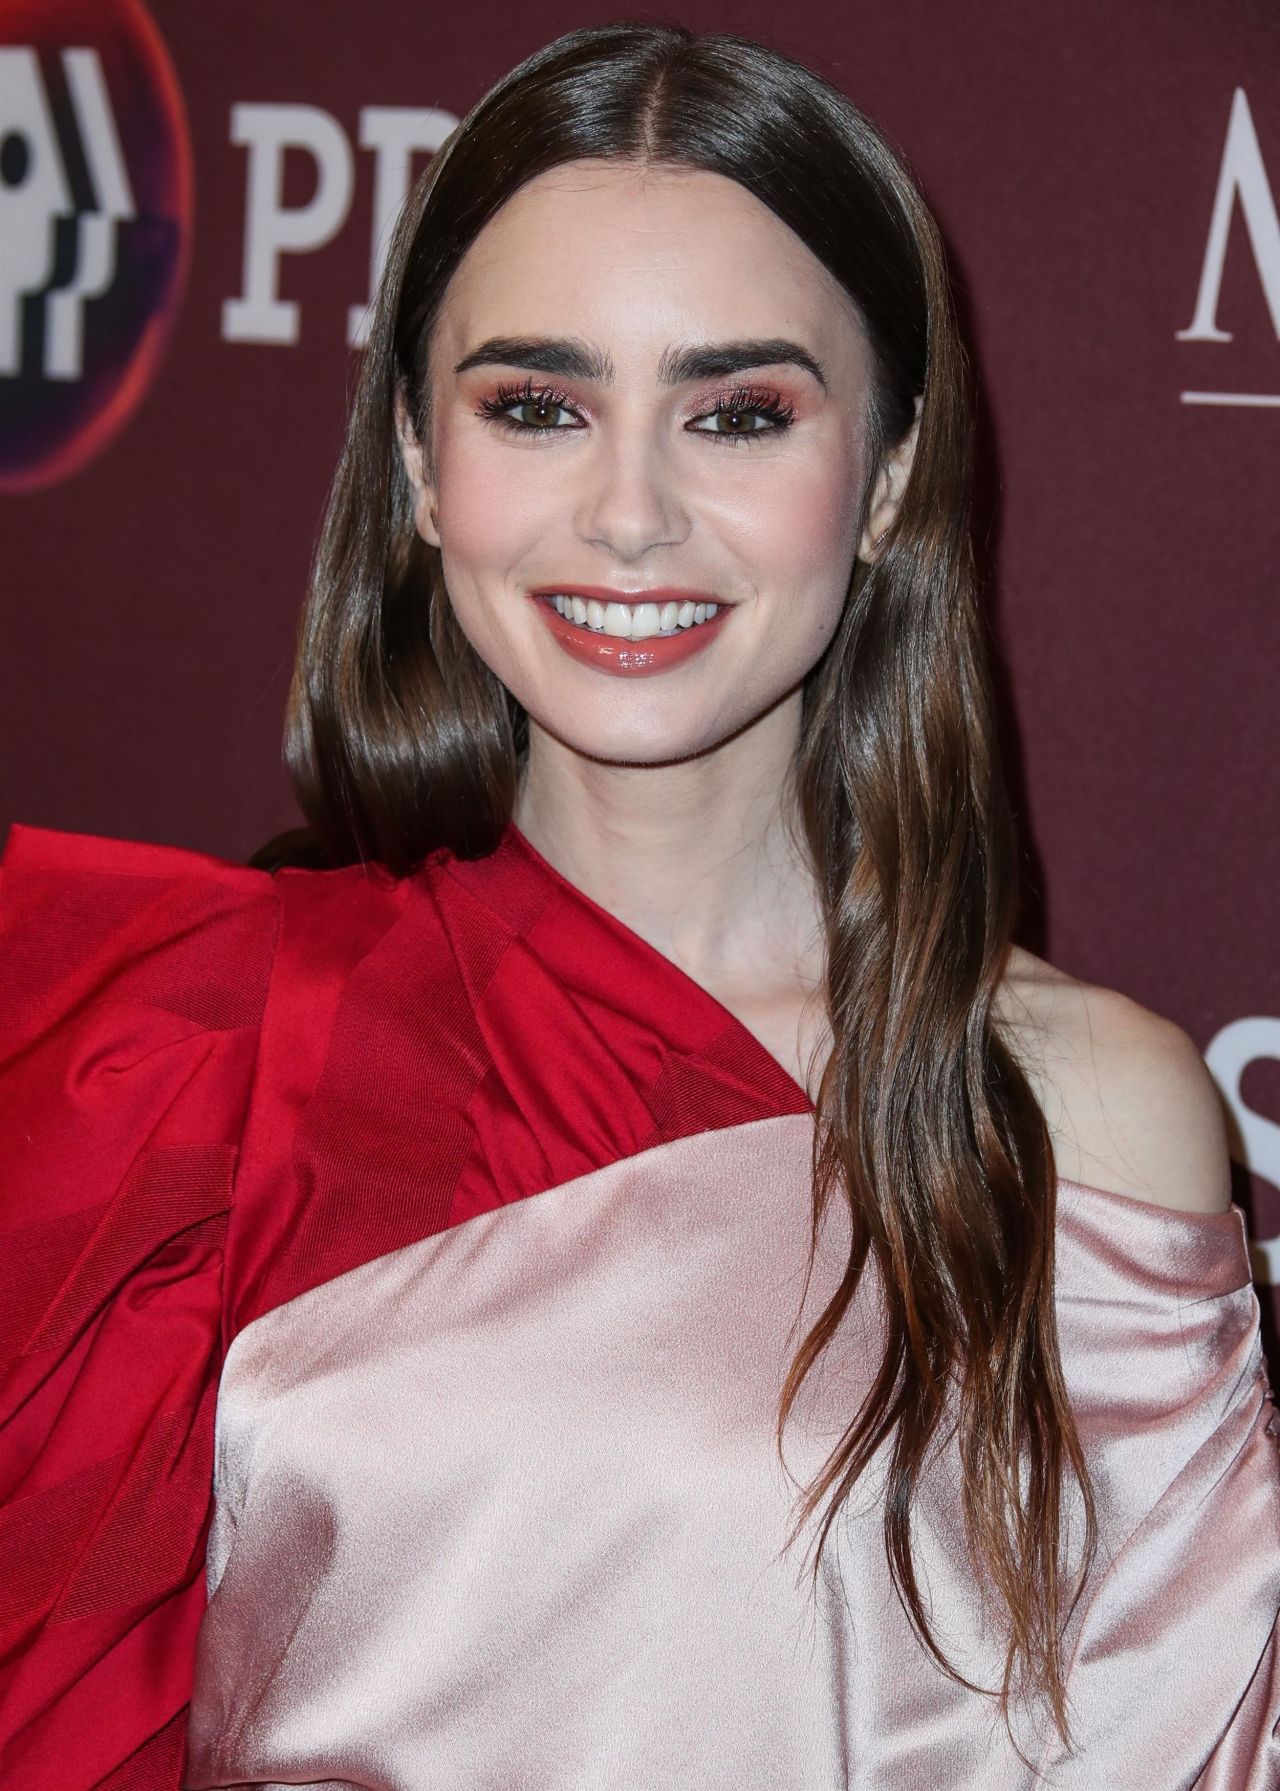 https://celebmafia.com/wp-content/uploads/2019/02/lily-collins-masterpiece-photocall-at-the-2019-winter-tca-press-tour-in-pasadena-6.jpg